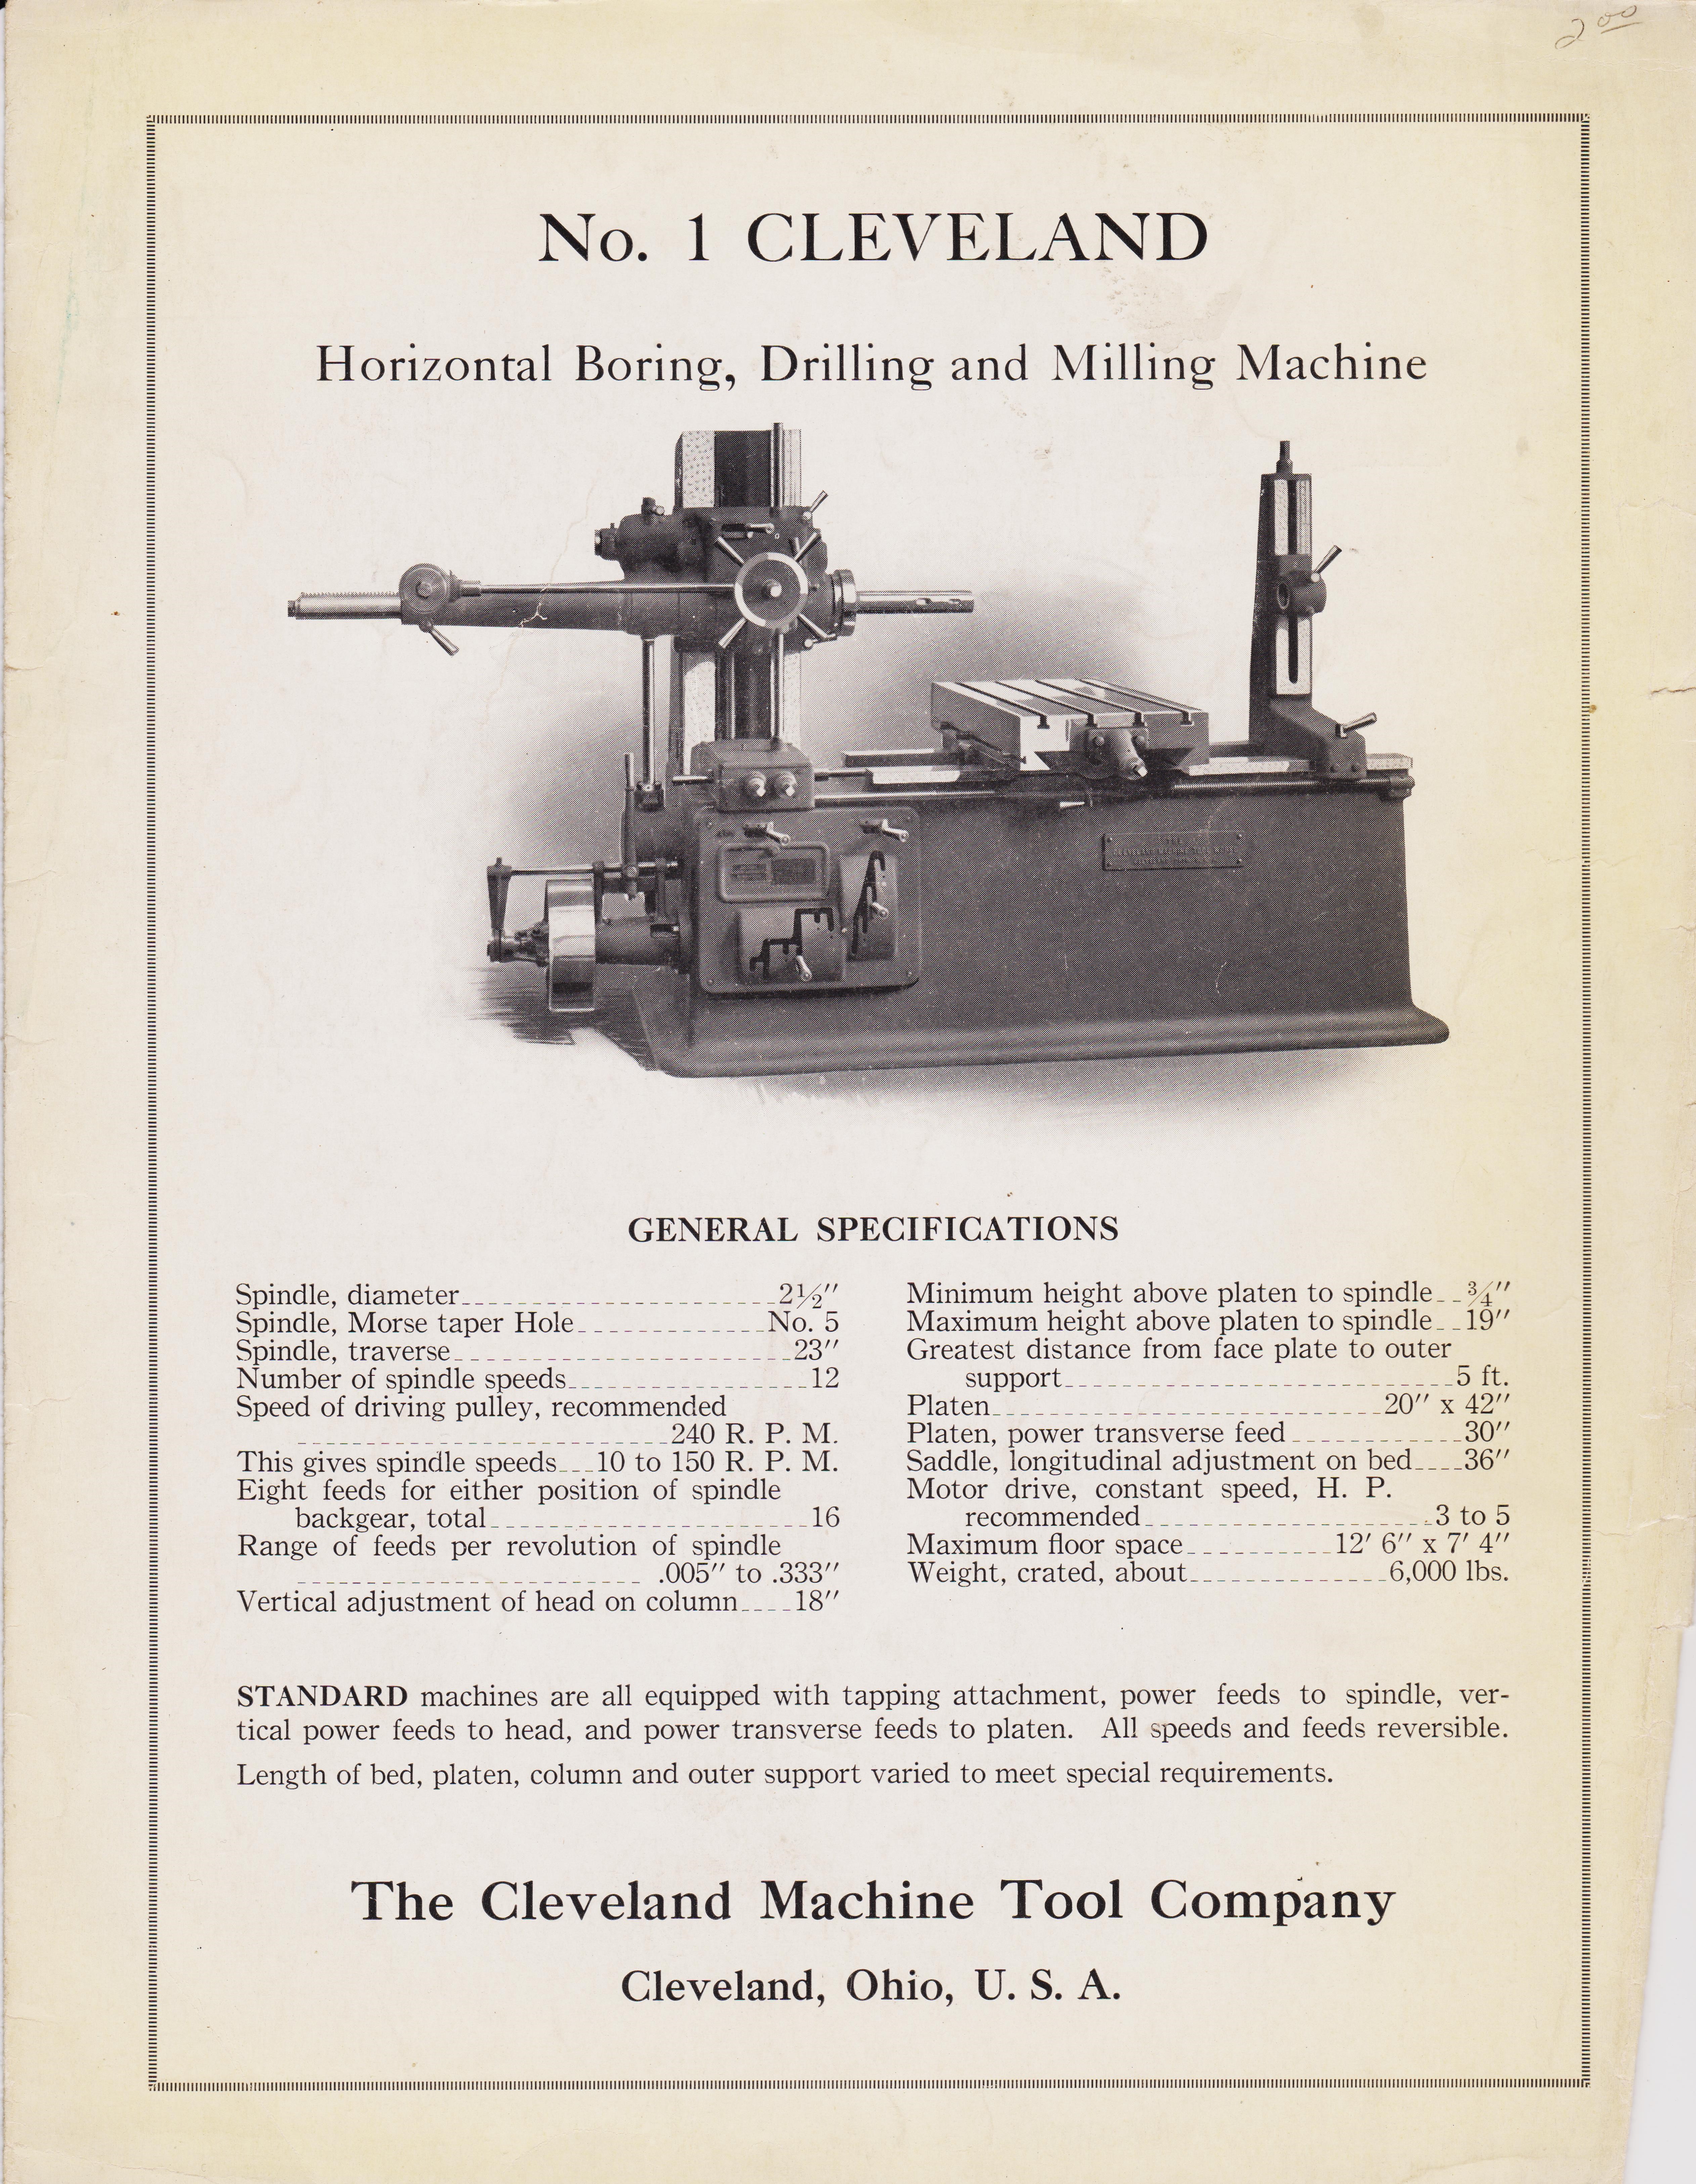 http://antiquemachinery.com/images-2019/Boring-Mill-No1-Cleveland-Machine-Tool-Co-    pg1-specifications-Howt-it-can-machine.jpg